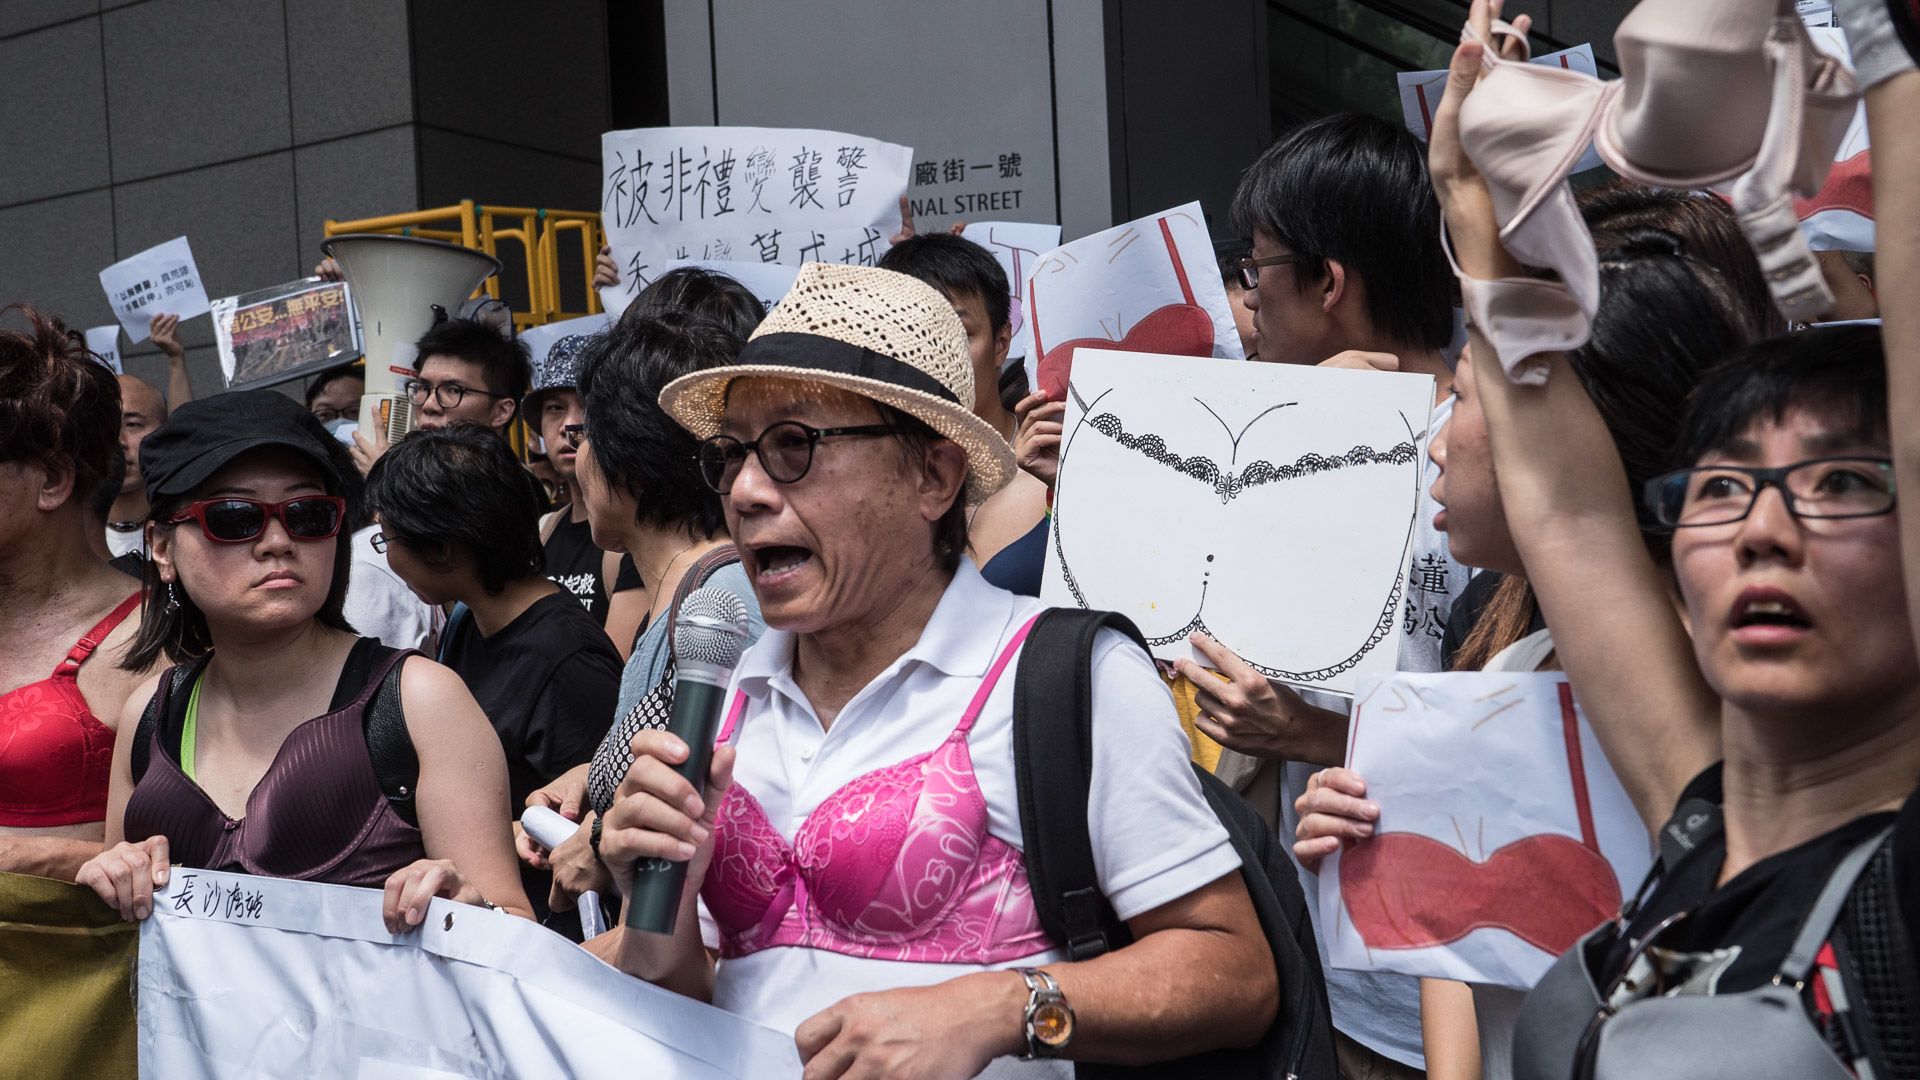 Bras become protest symbol in Hong Kong